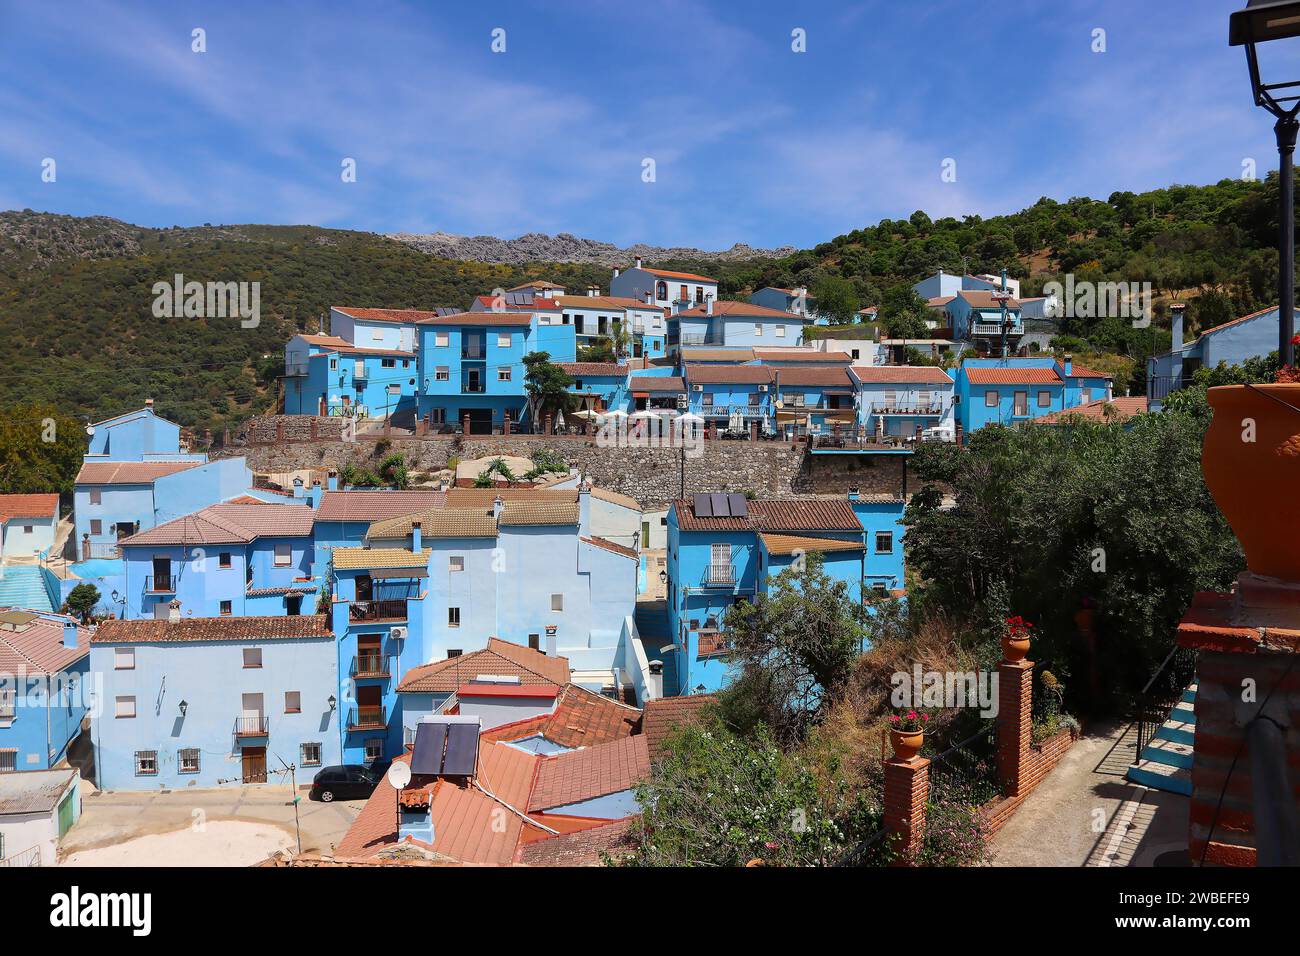 Juzcar, the Smurf Village, painted blue for the premiere of The Smurfs movie in 2011, Andalusia, Spain Stock Photo